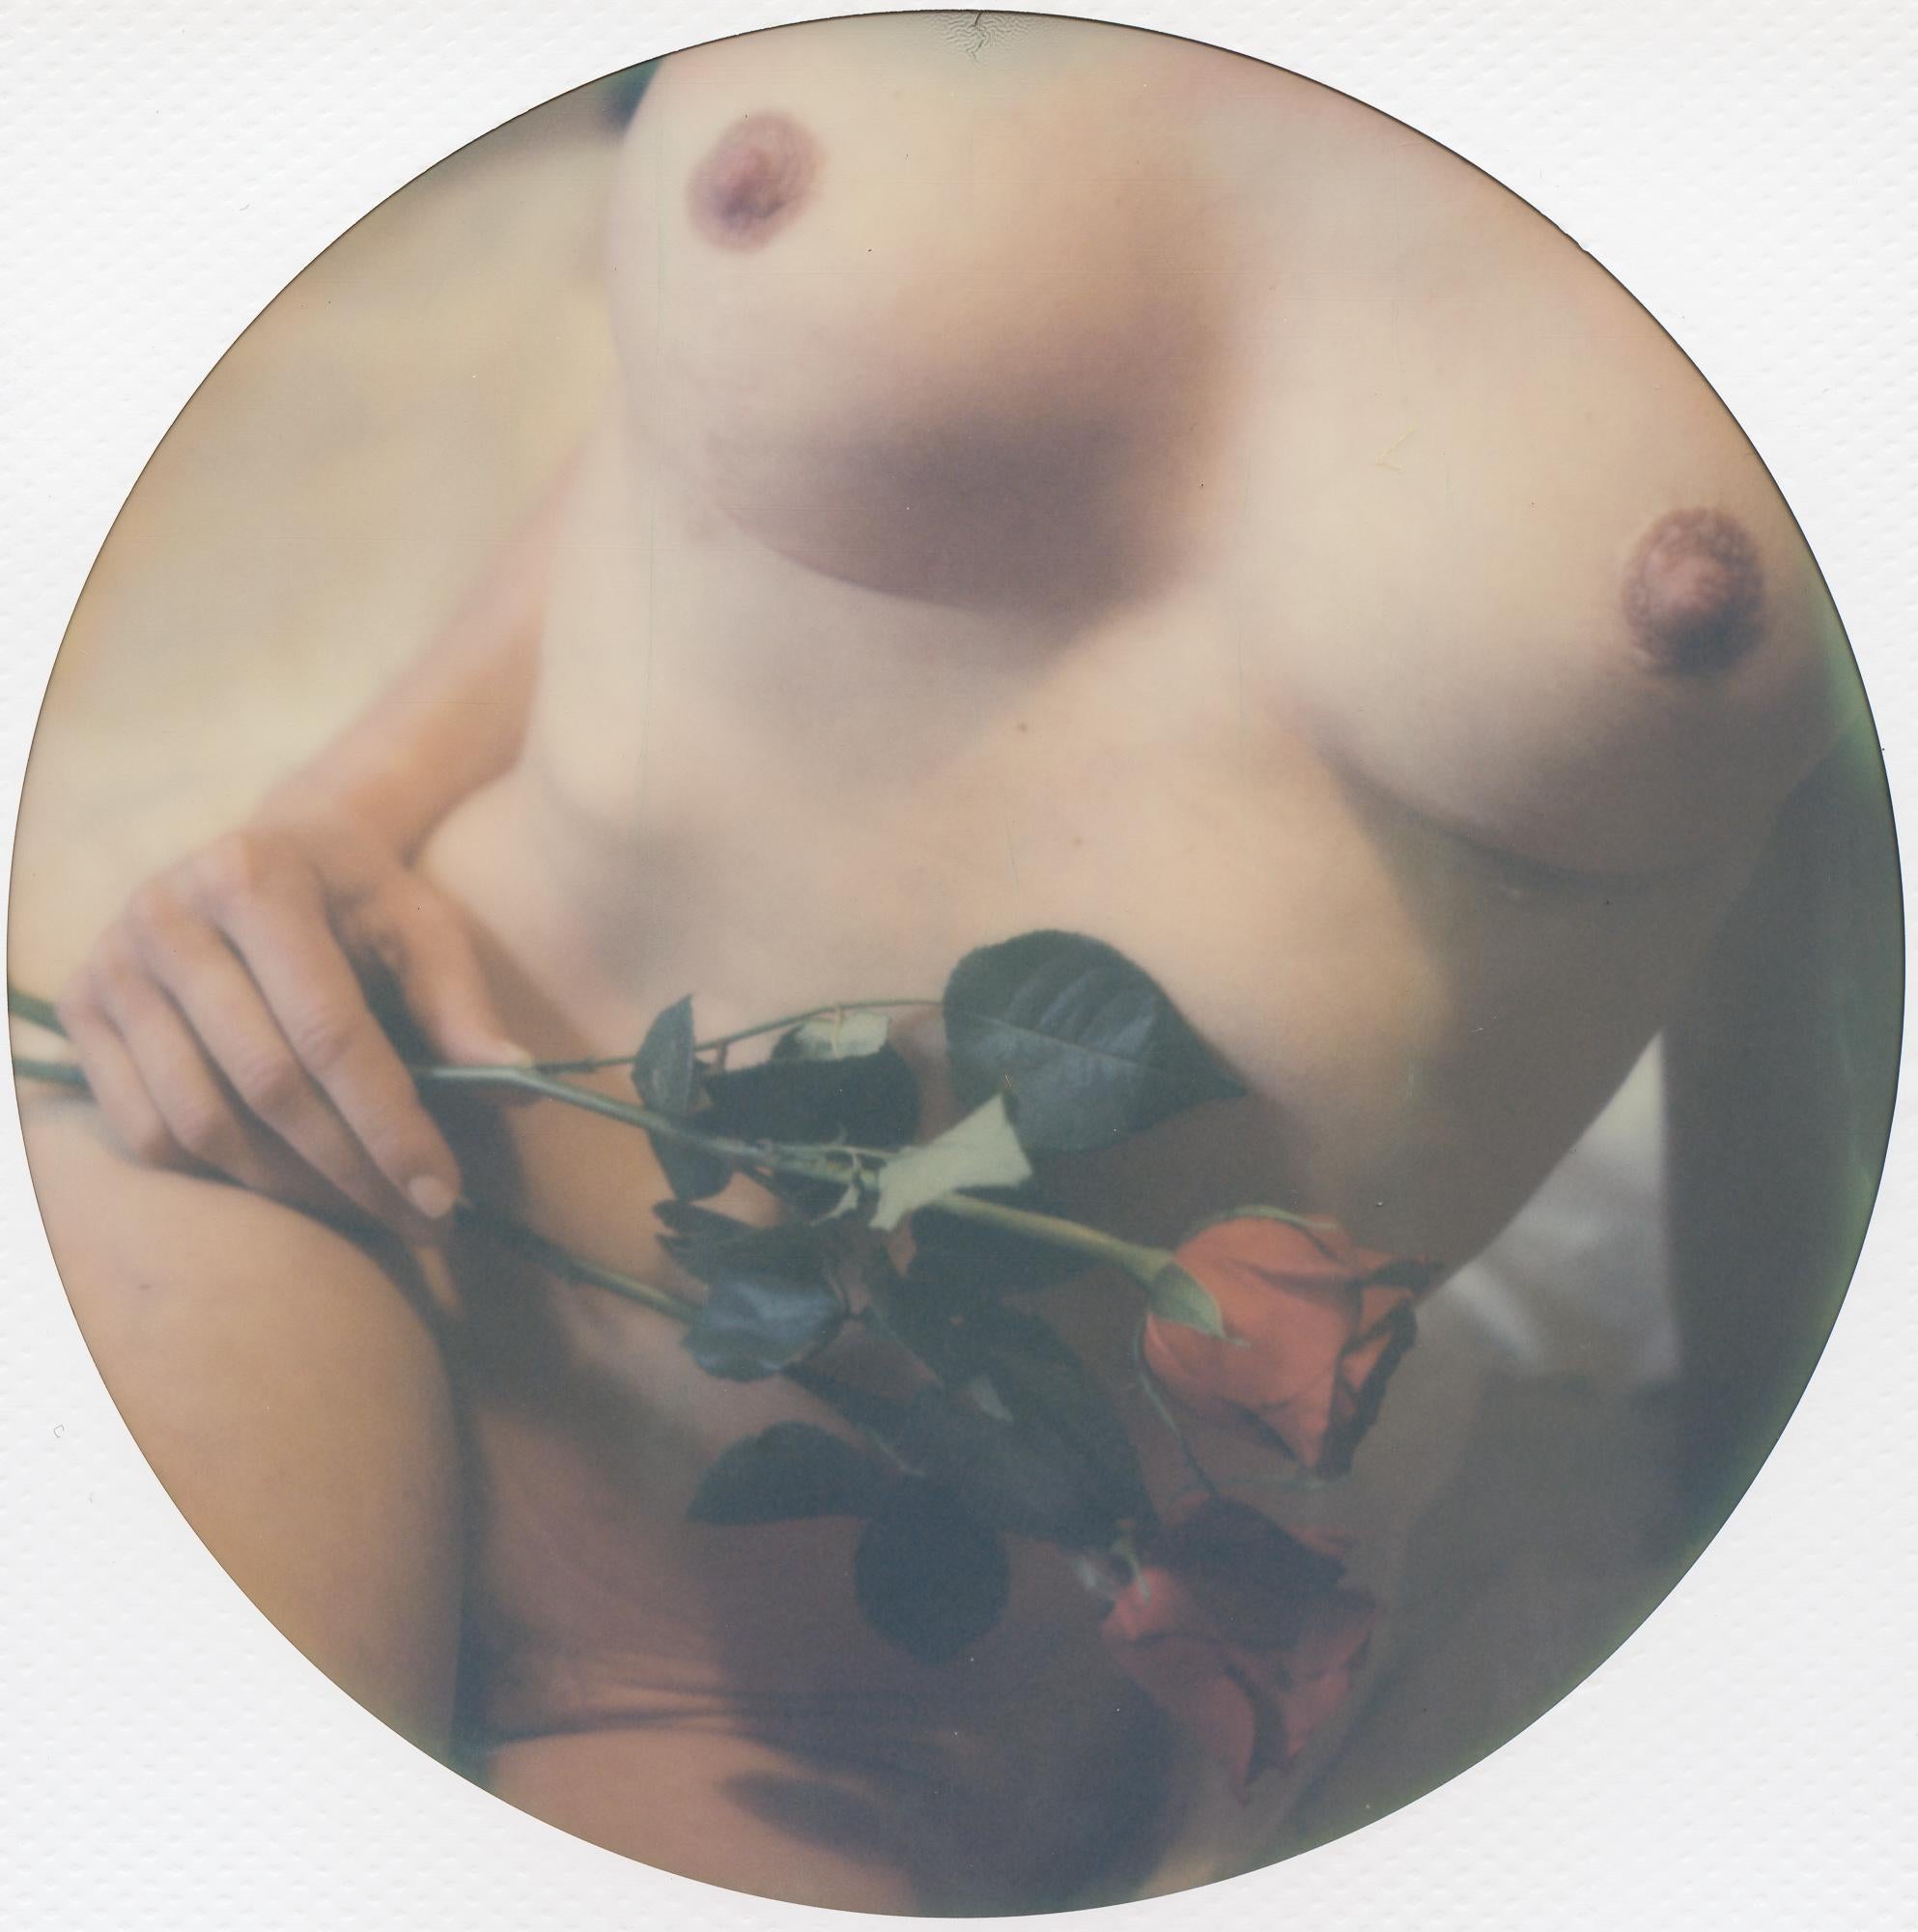 Roses are Red, 2018, 
50x50cm, Edition 1/7 plus 2 Artist Proofs, 
Digital C-Print, based on a Polaroid photograph 
Signed on the back and with certificate. 
Artist inventory PL2018-430.
not mounted. 

Kirsten Thys van den Audenaerde is a self-taught